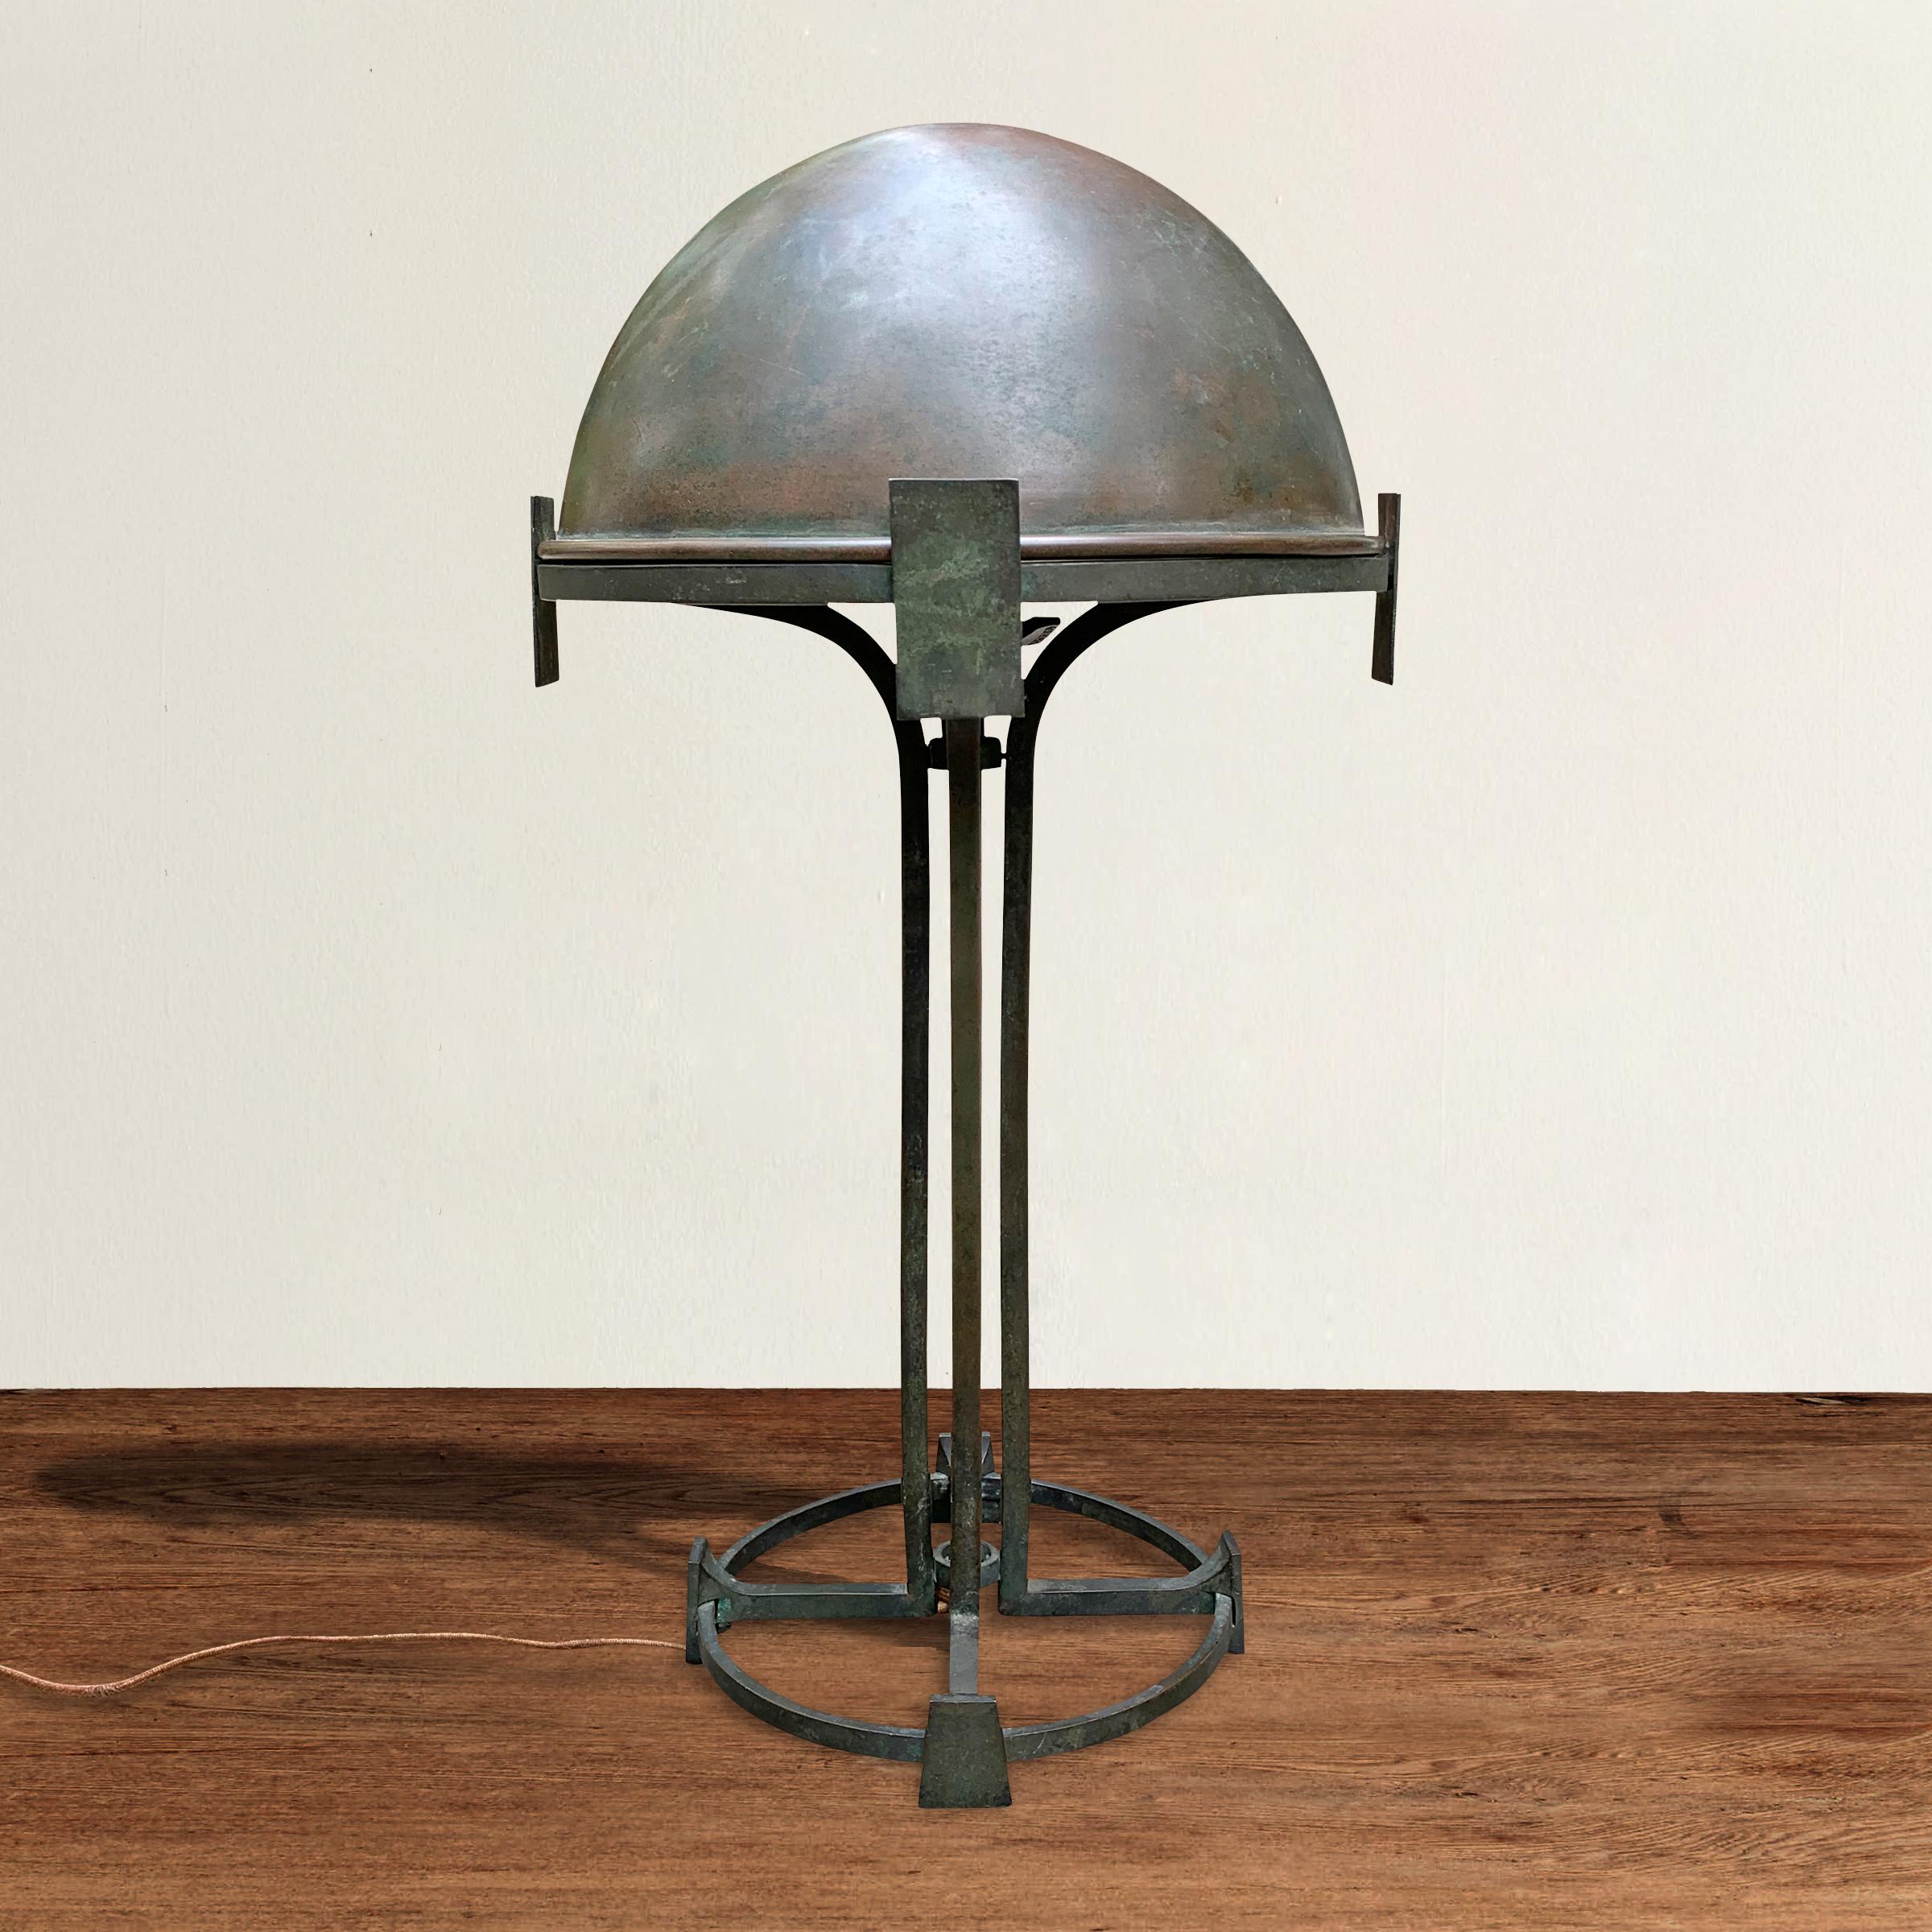 An incredible fine quality early 20th century Vienna secession bronze table lamp with a removable dome shade supported by four square uprights turning into legs with spade-form feet and a circular base. The bronze has patinated beautifully! Marked